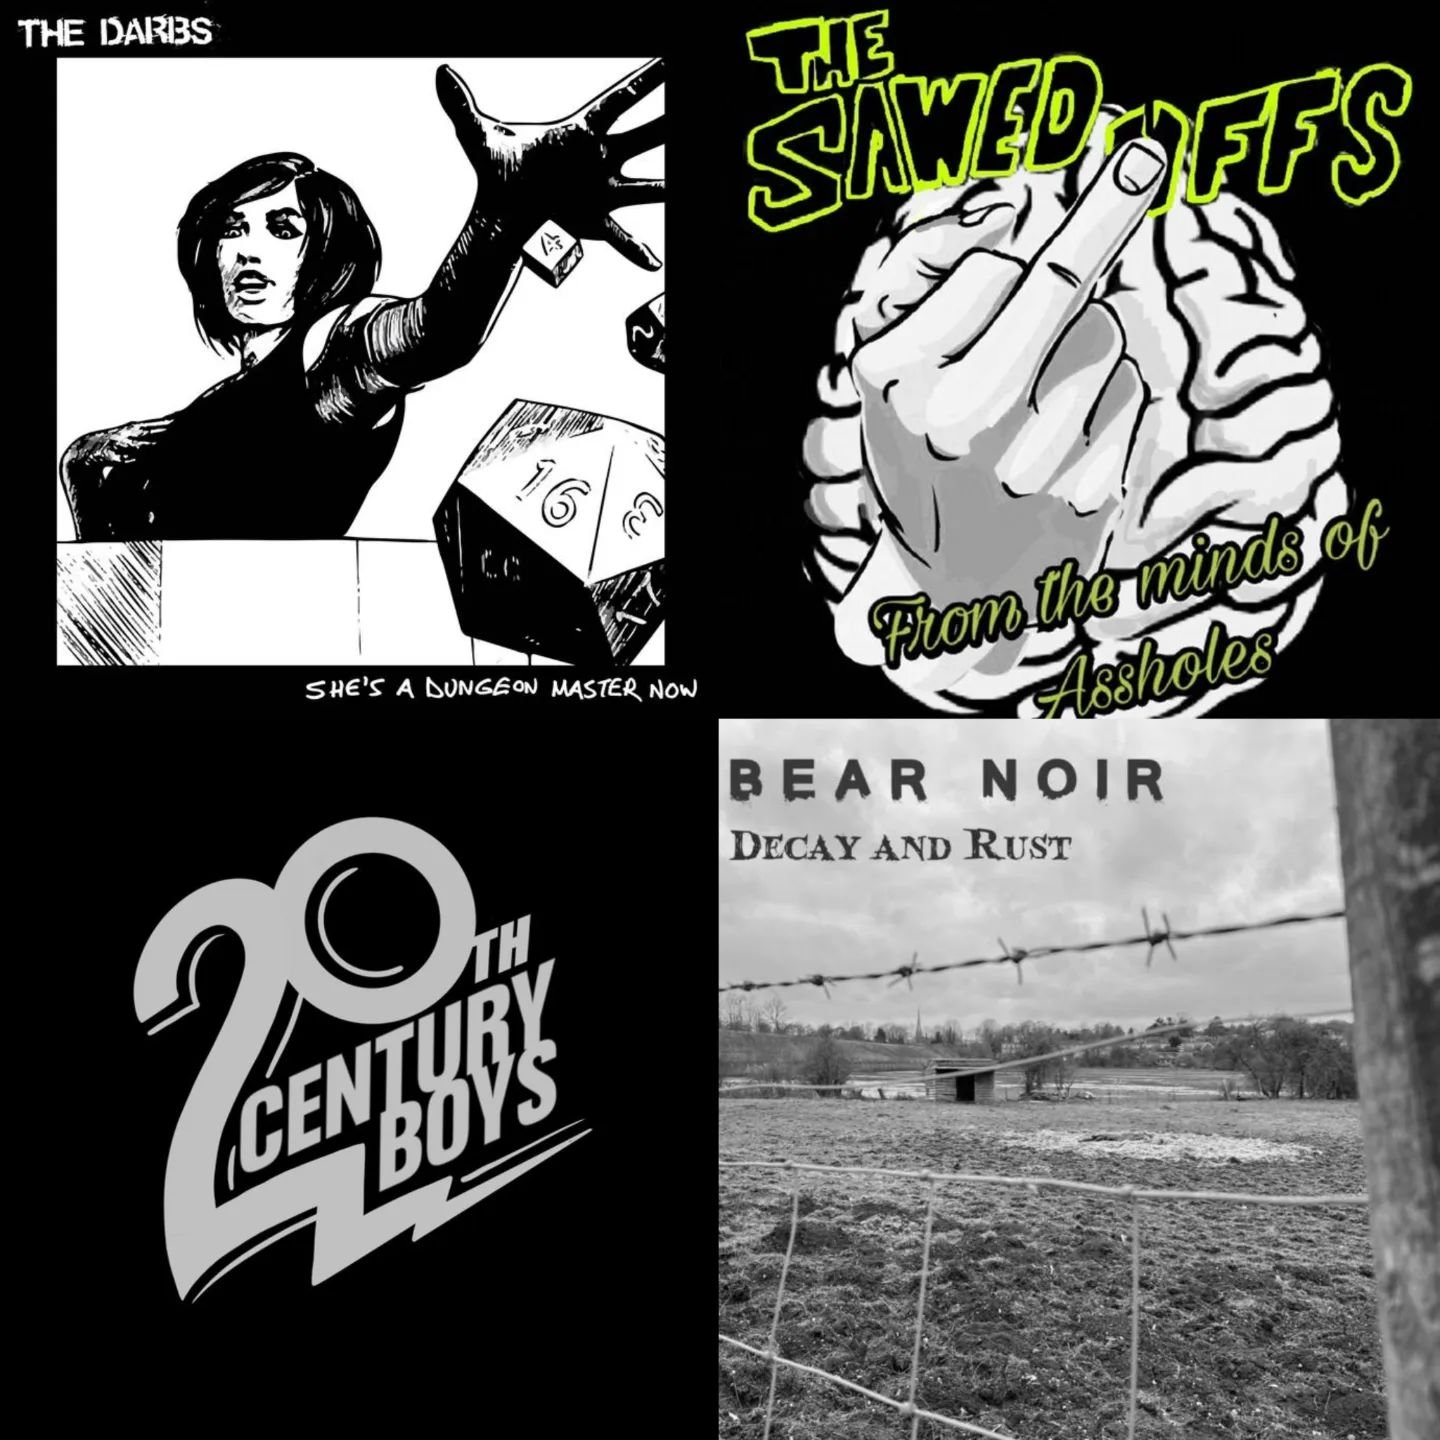 Episode 362, including tracks from @prevention217, @bear.noir.band, @20th_century_boys_band, @racetraitor, @thesawedoffs, @stillfightinggod, #TheDarbs, @fullofhell, and @marcelwavemuzak. Find Eric at @scaryuncle_eric_slc of @anonymousbandslc, @leadme